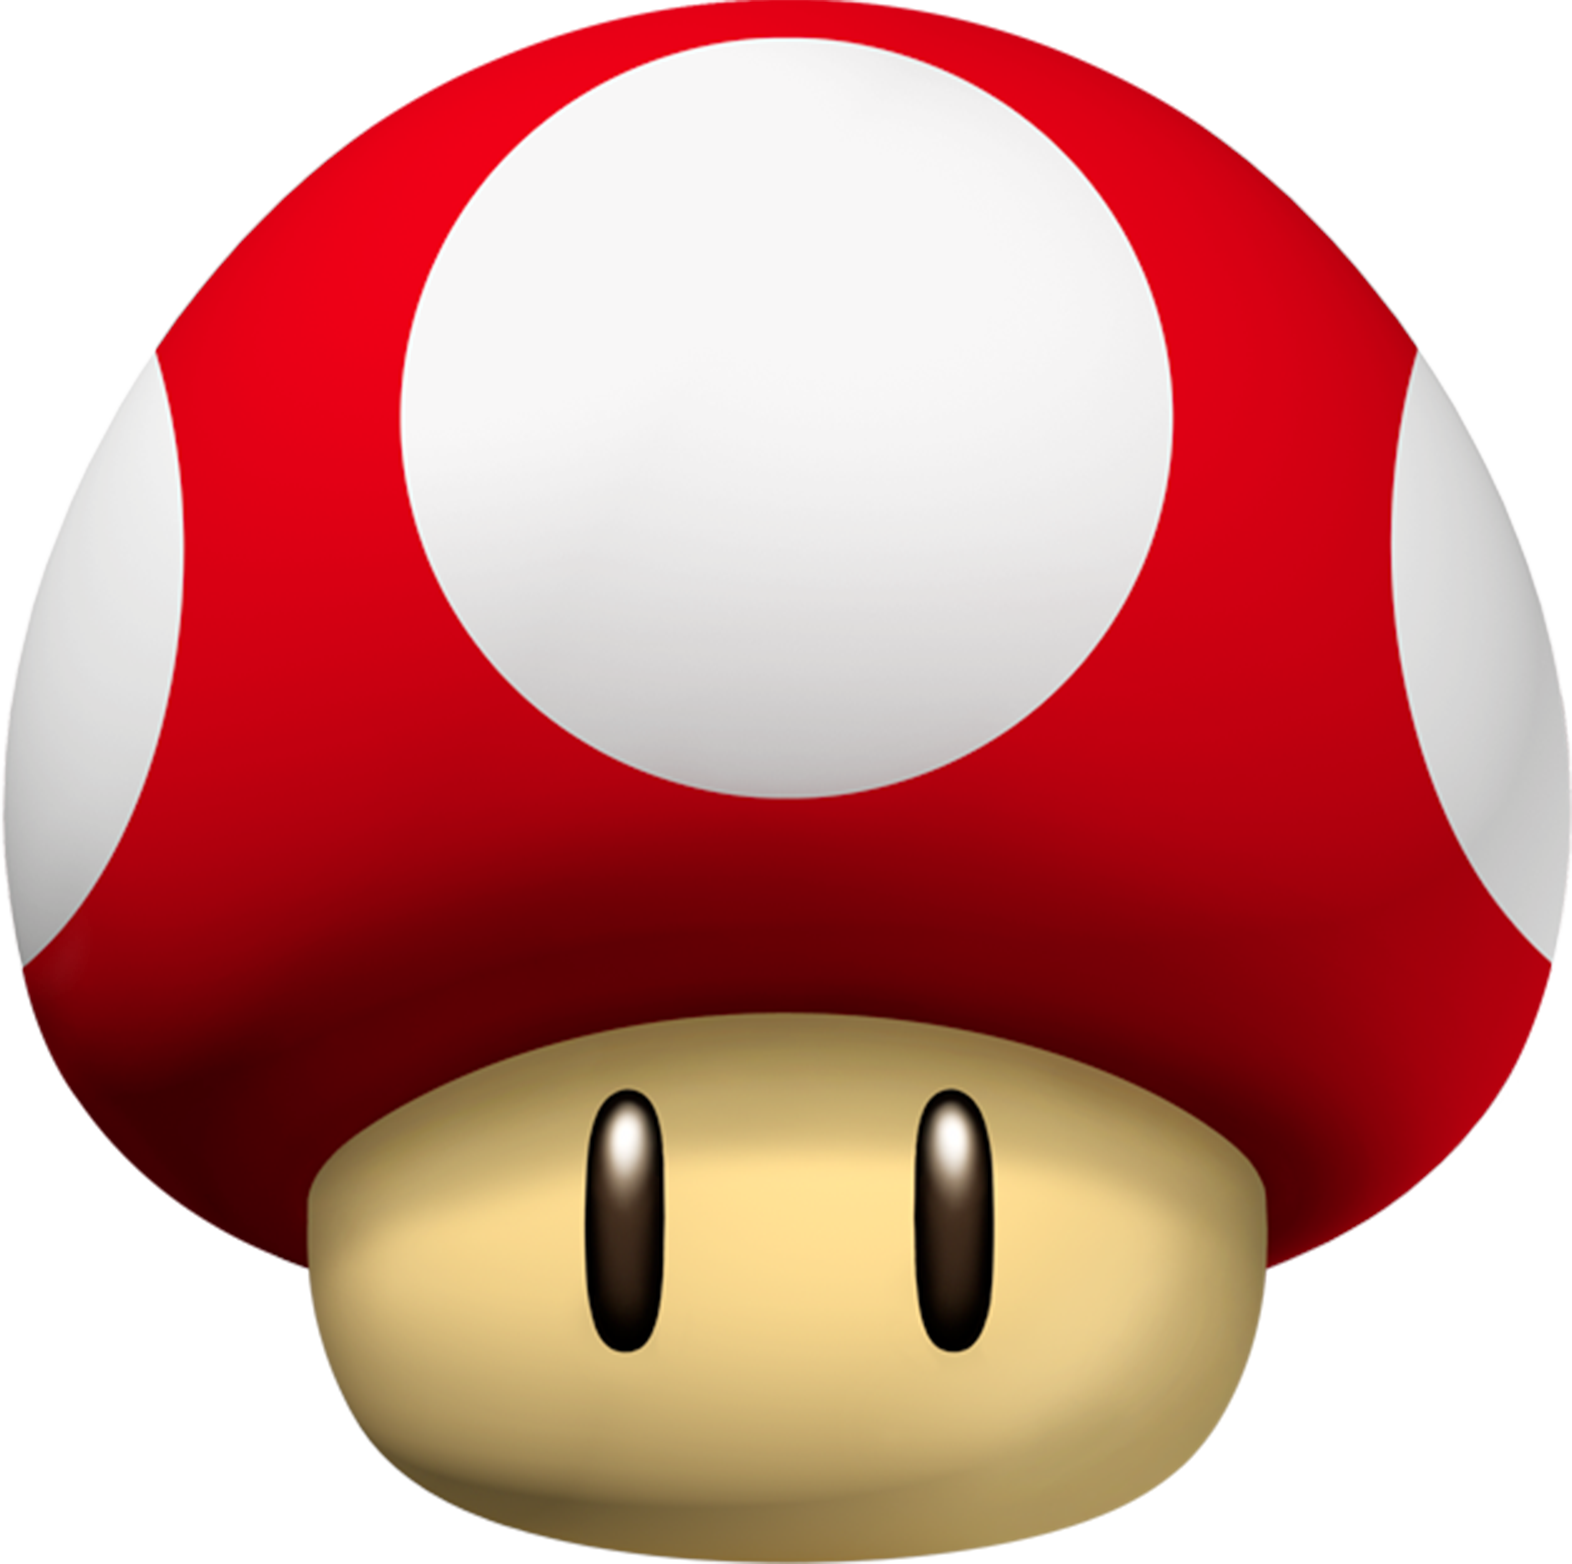 A Cartoon Mushroom With A White And Red Polka Dot Hat